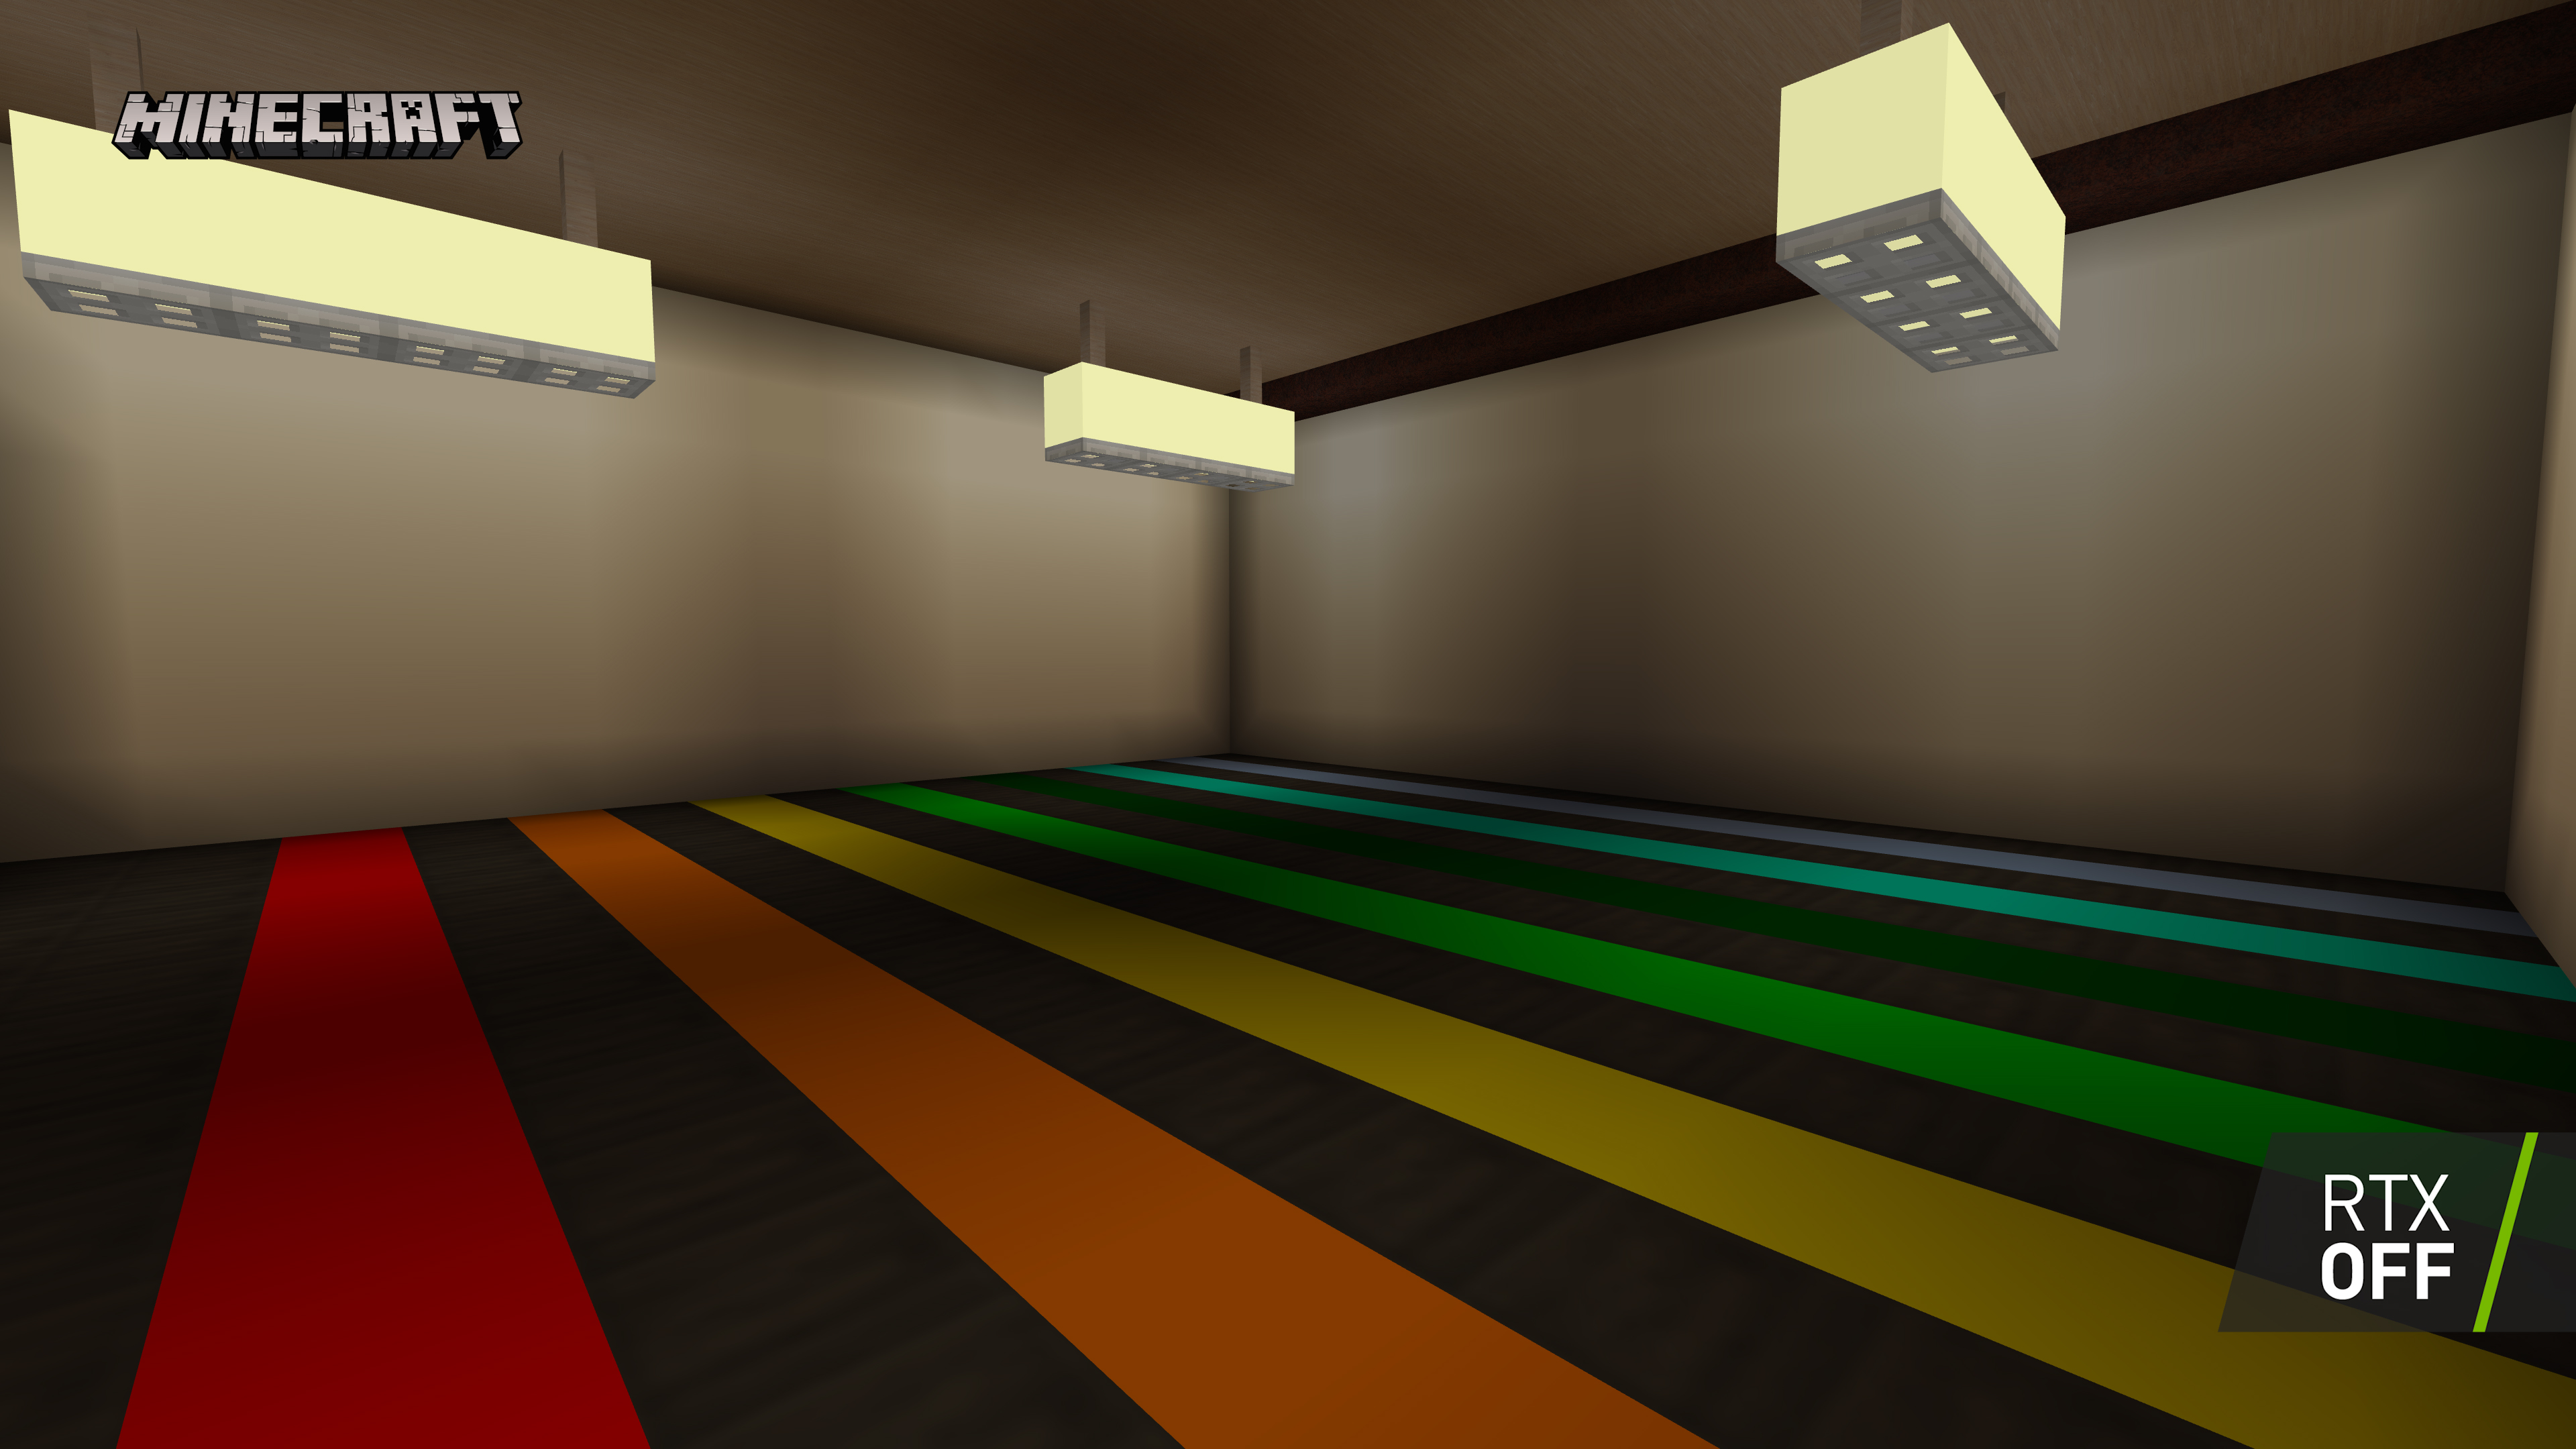 minecraft-with-rtx-beta-color-light-and-shadow-003-rtx-off.jpg